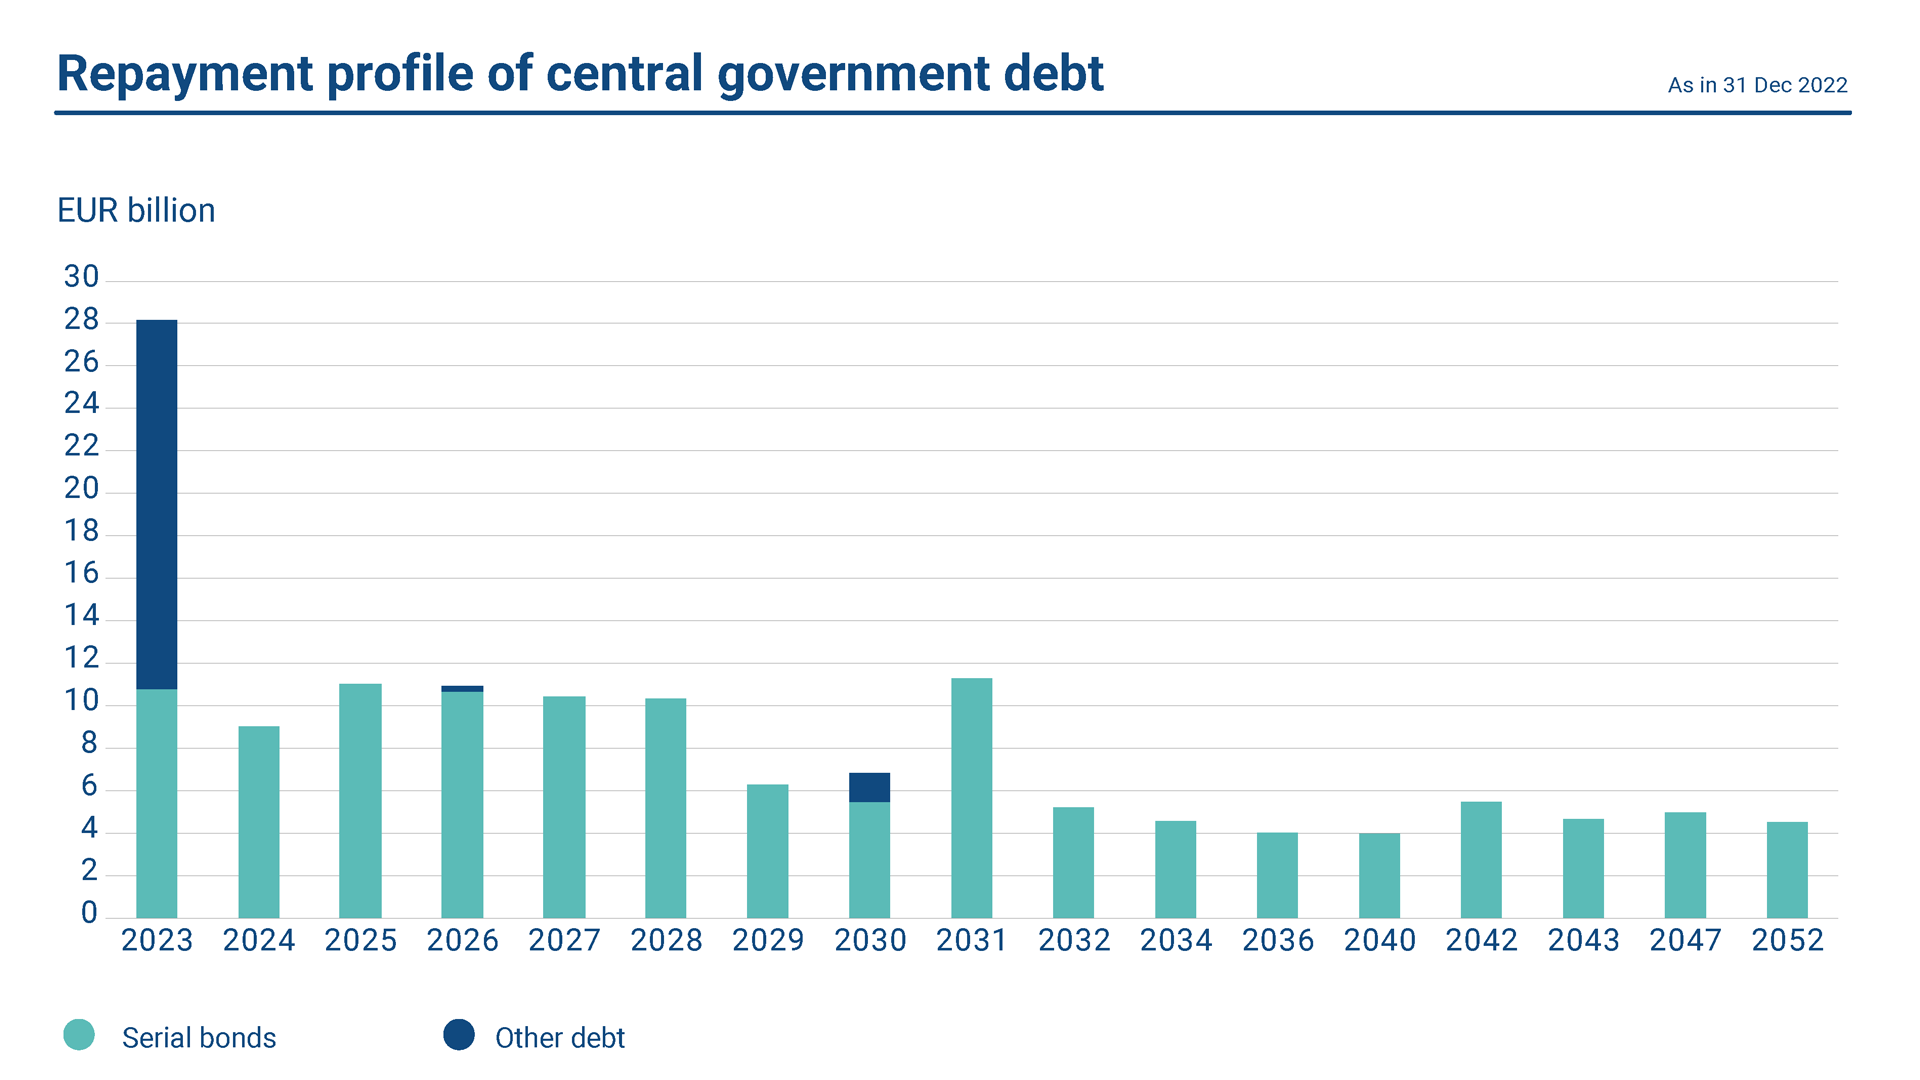 The graph shows the repayment profile of central government debt. 